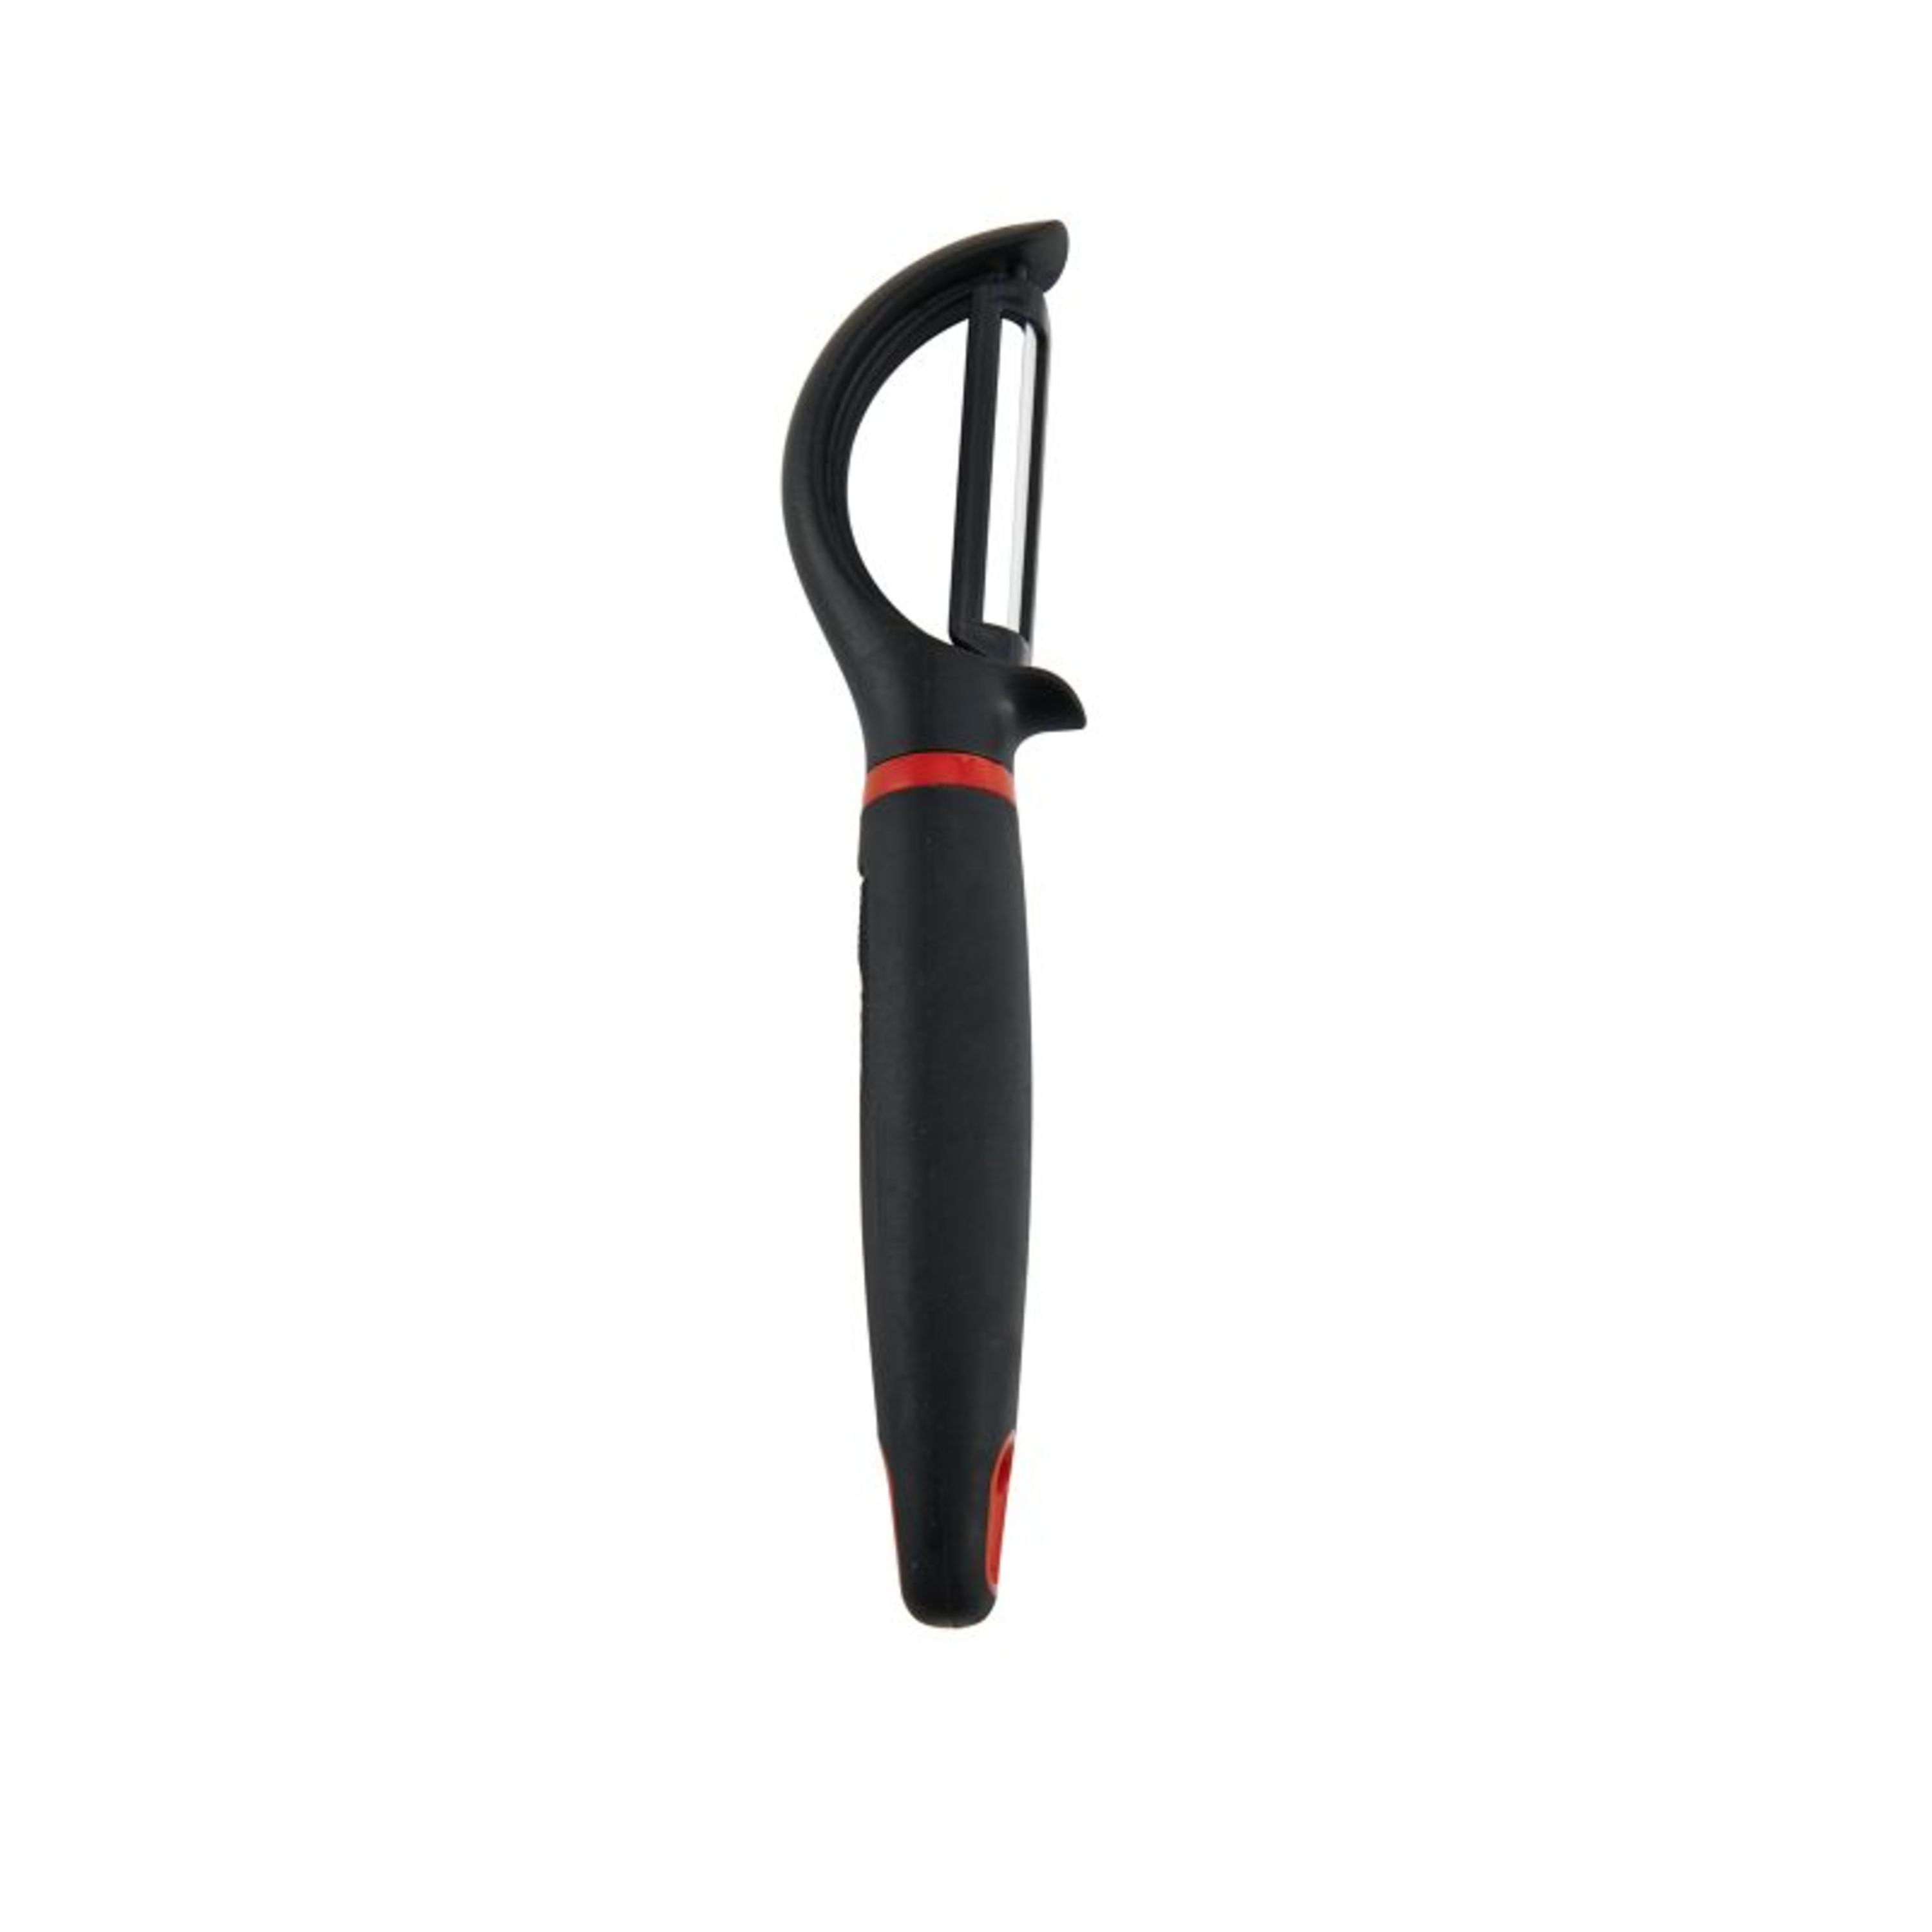 Farberware 1.6 in x 7.65 in Soft Grip Ceramic Blade Peeler Black with Red  Accents